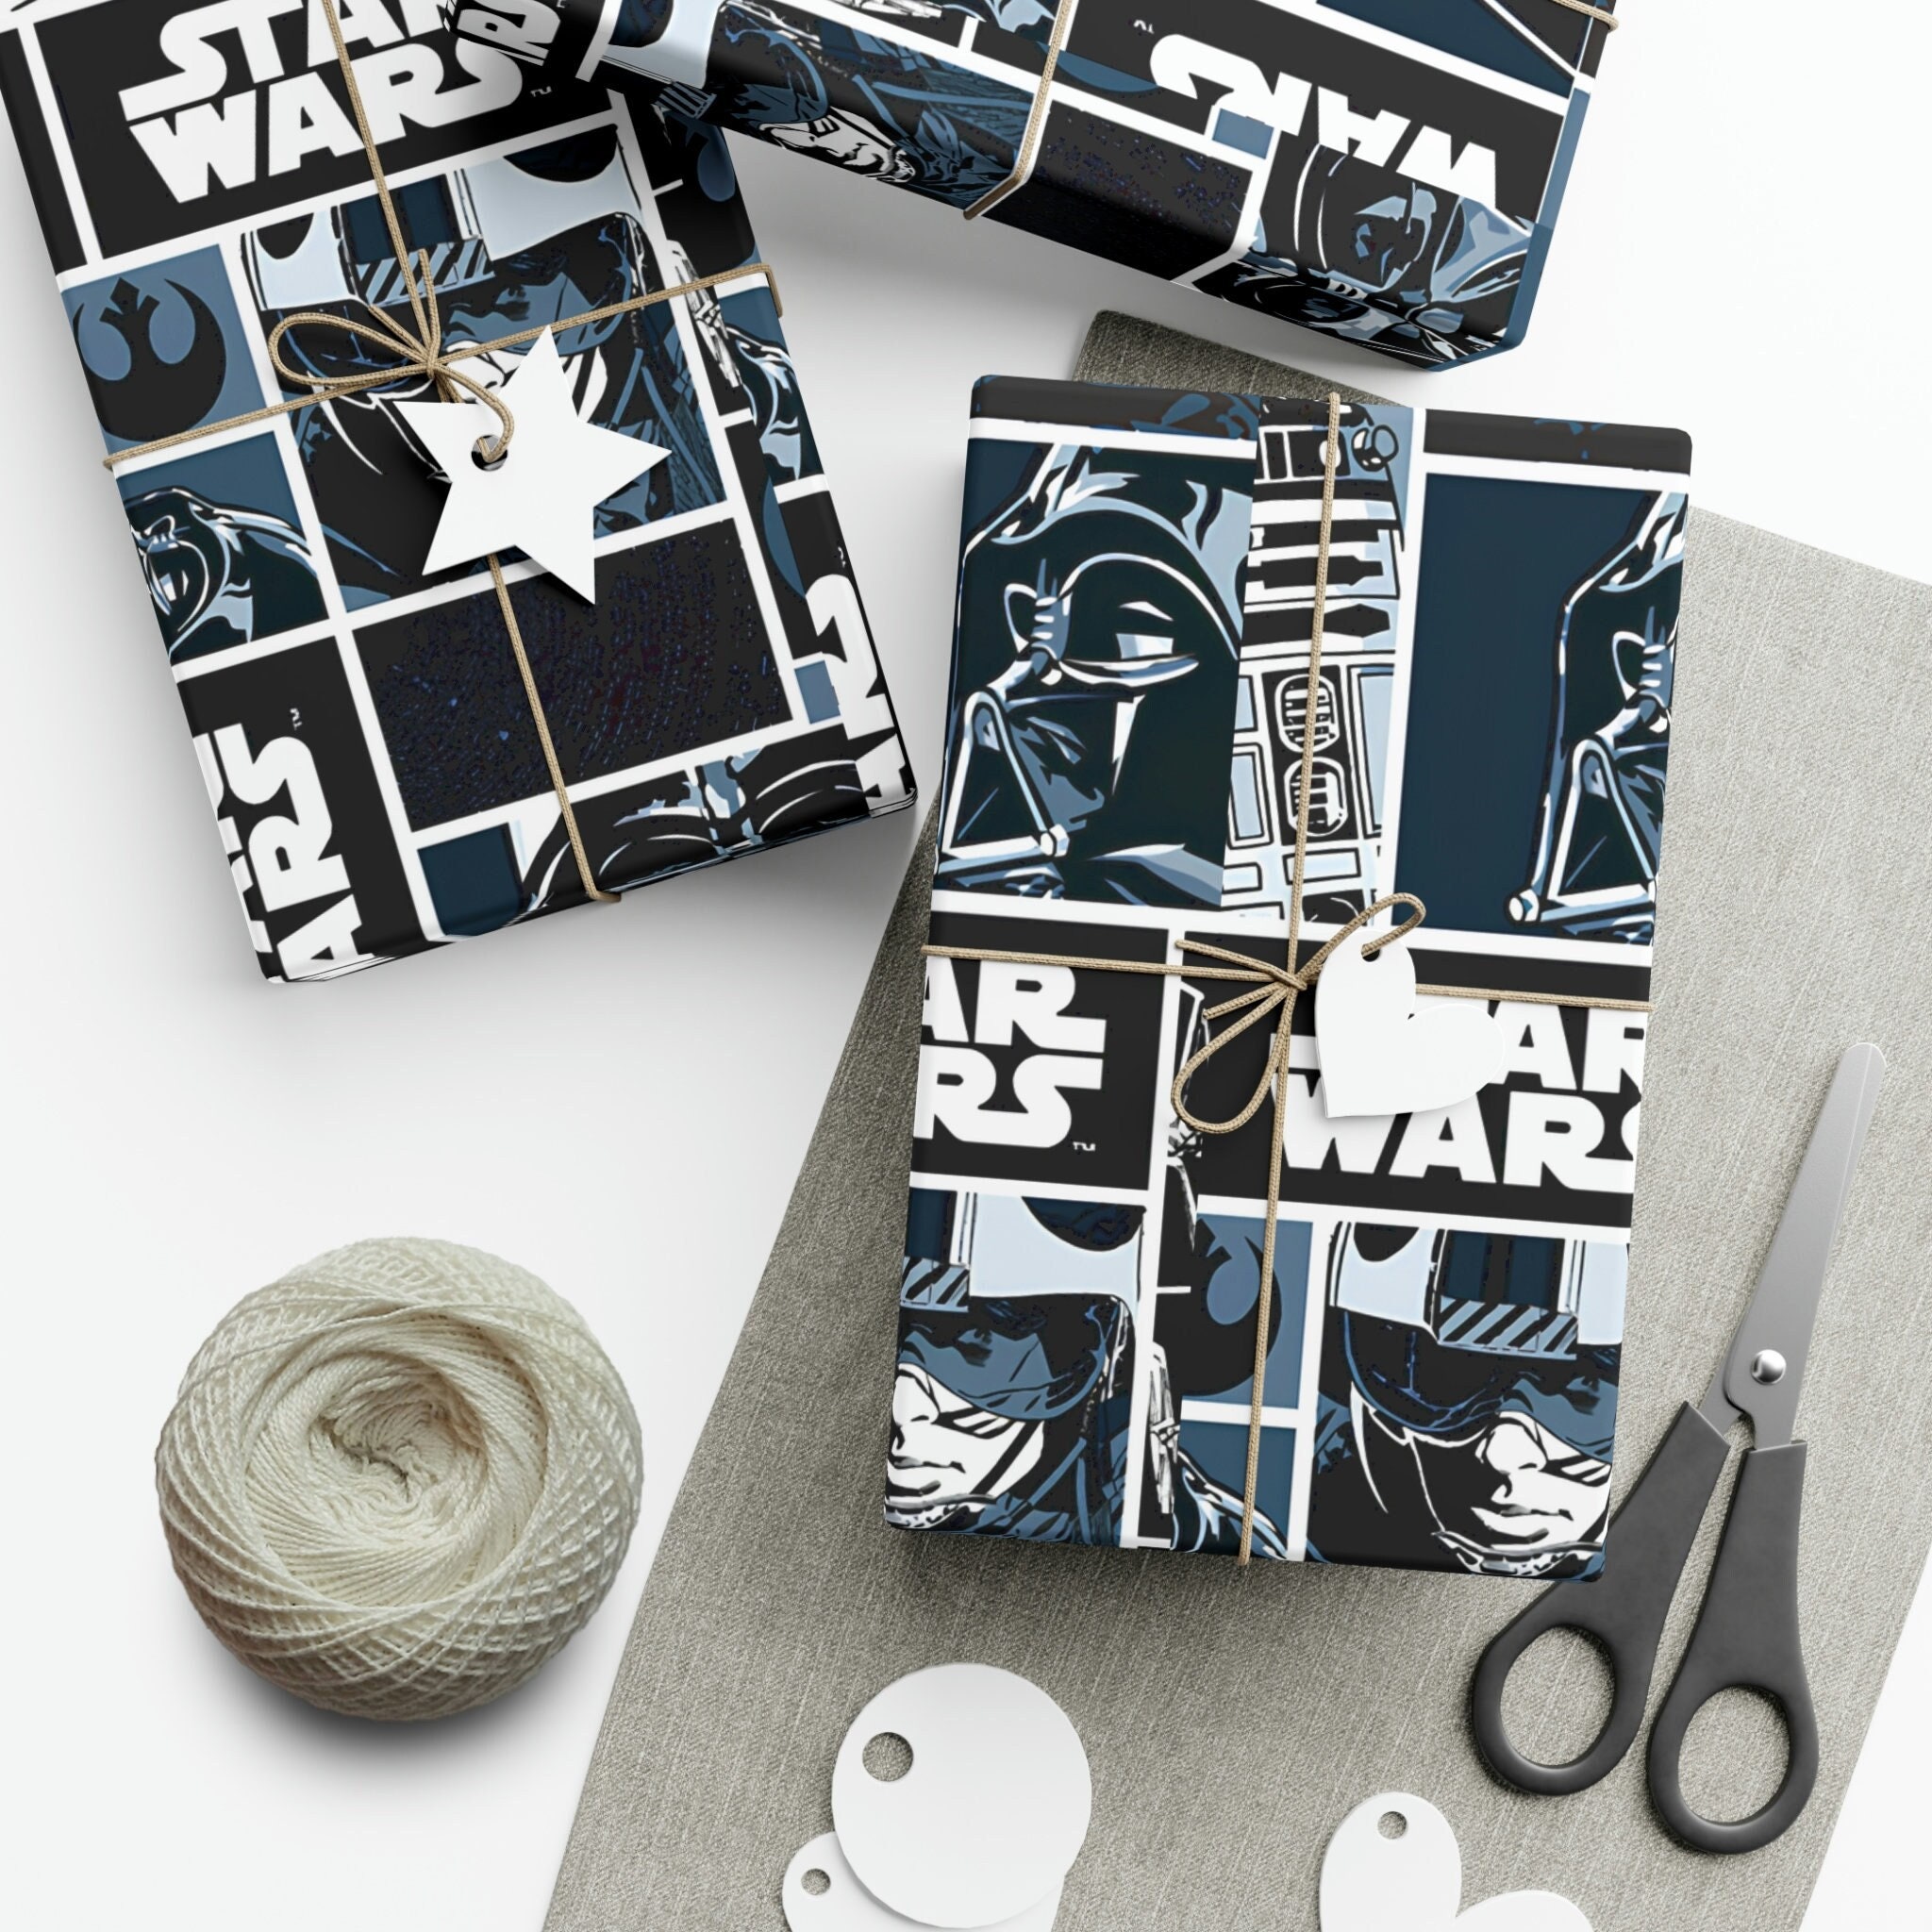 Vintage Star Wars Disney Gift Wrap Papers Perfect for Birthday, Christmas,  or Any Special Occasion Gift 